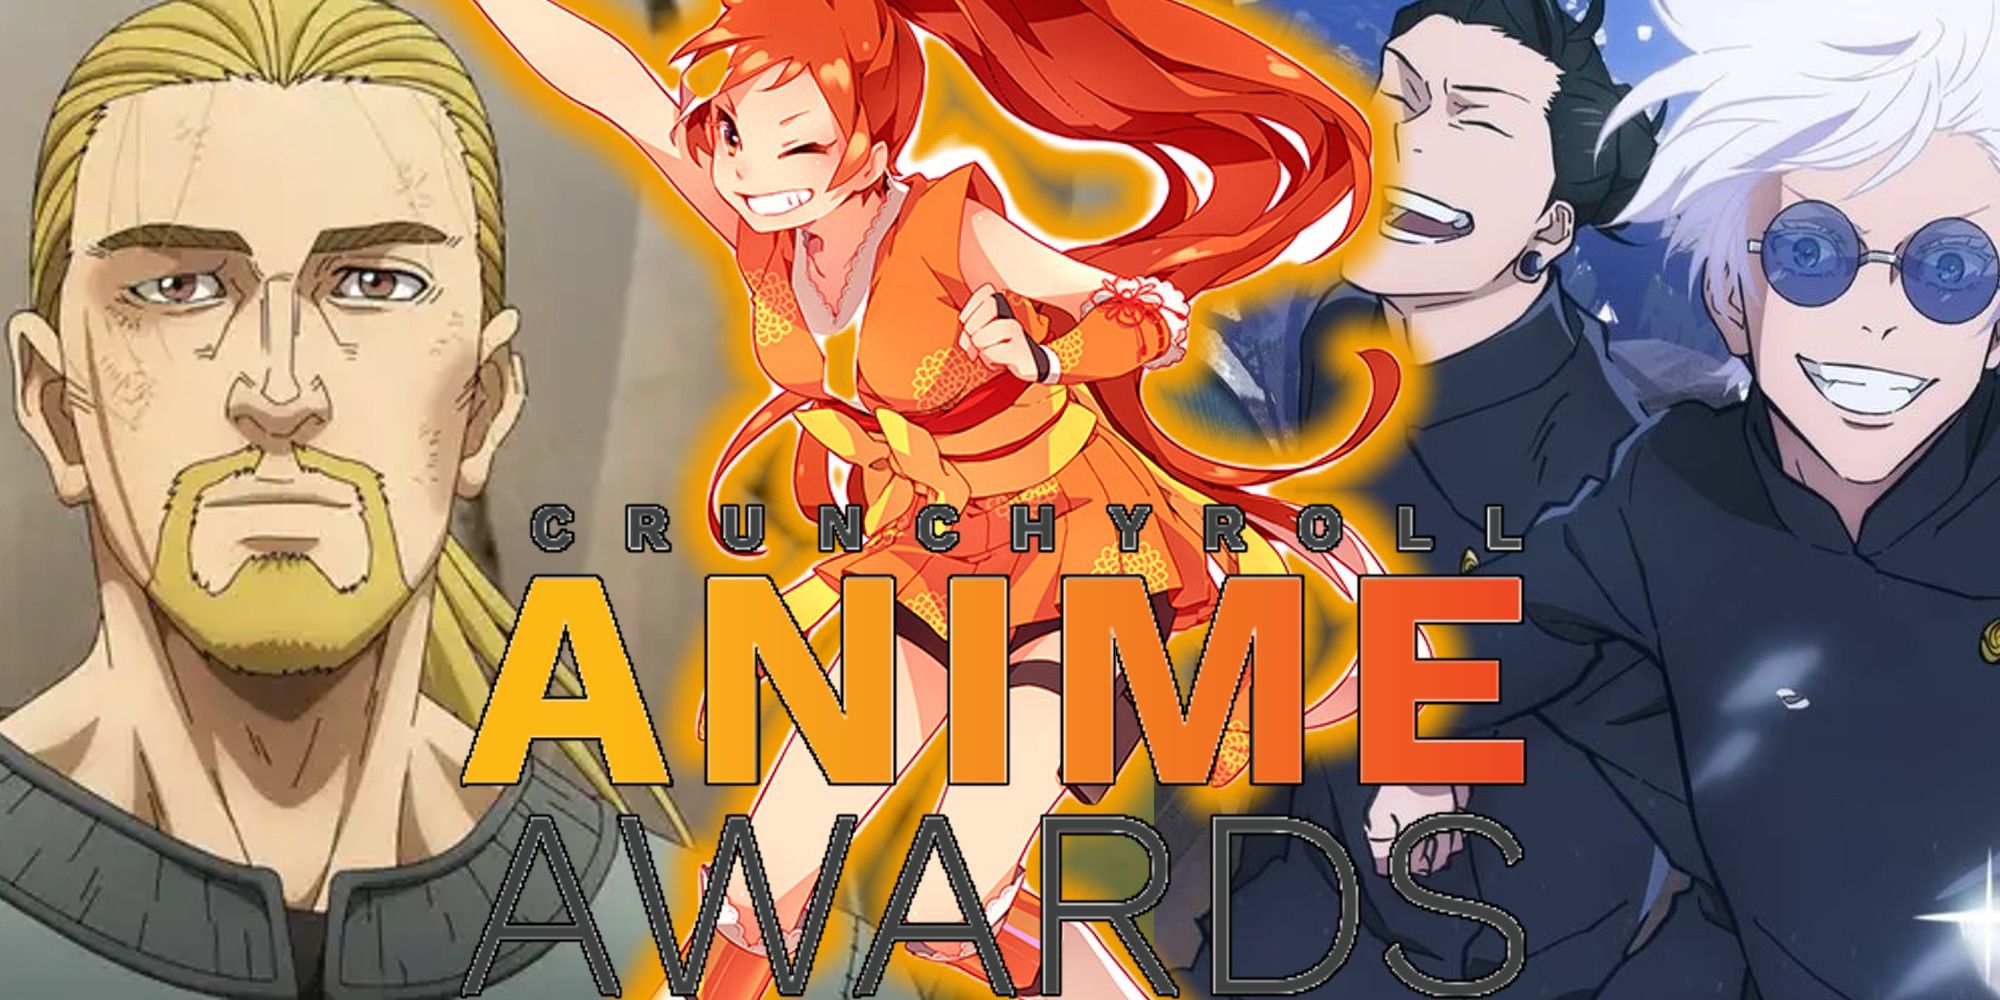 Crunchyroll Anime Awards featuring Jujutsu Kaisen and Vinland Saga with Crunchyroll-Hime in the middle